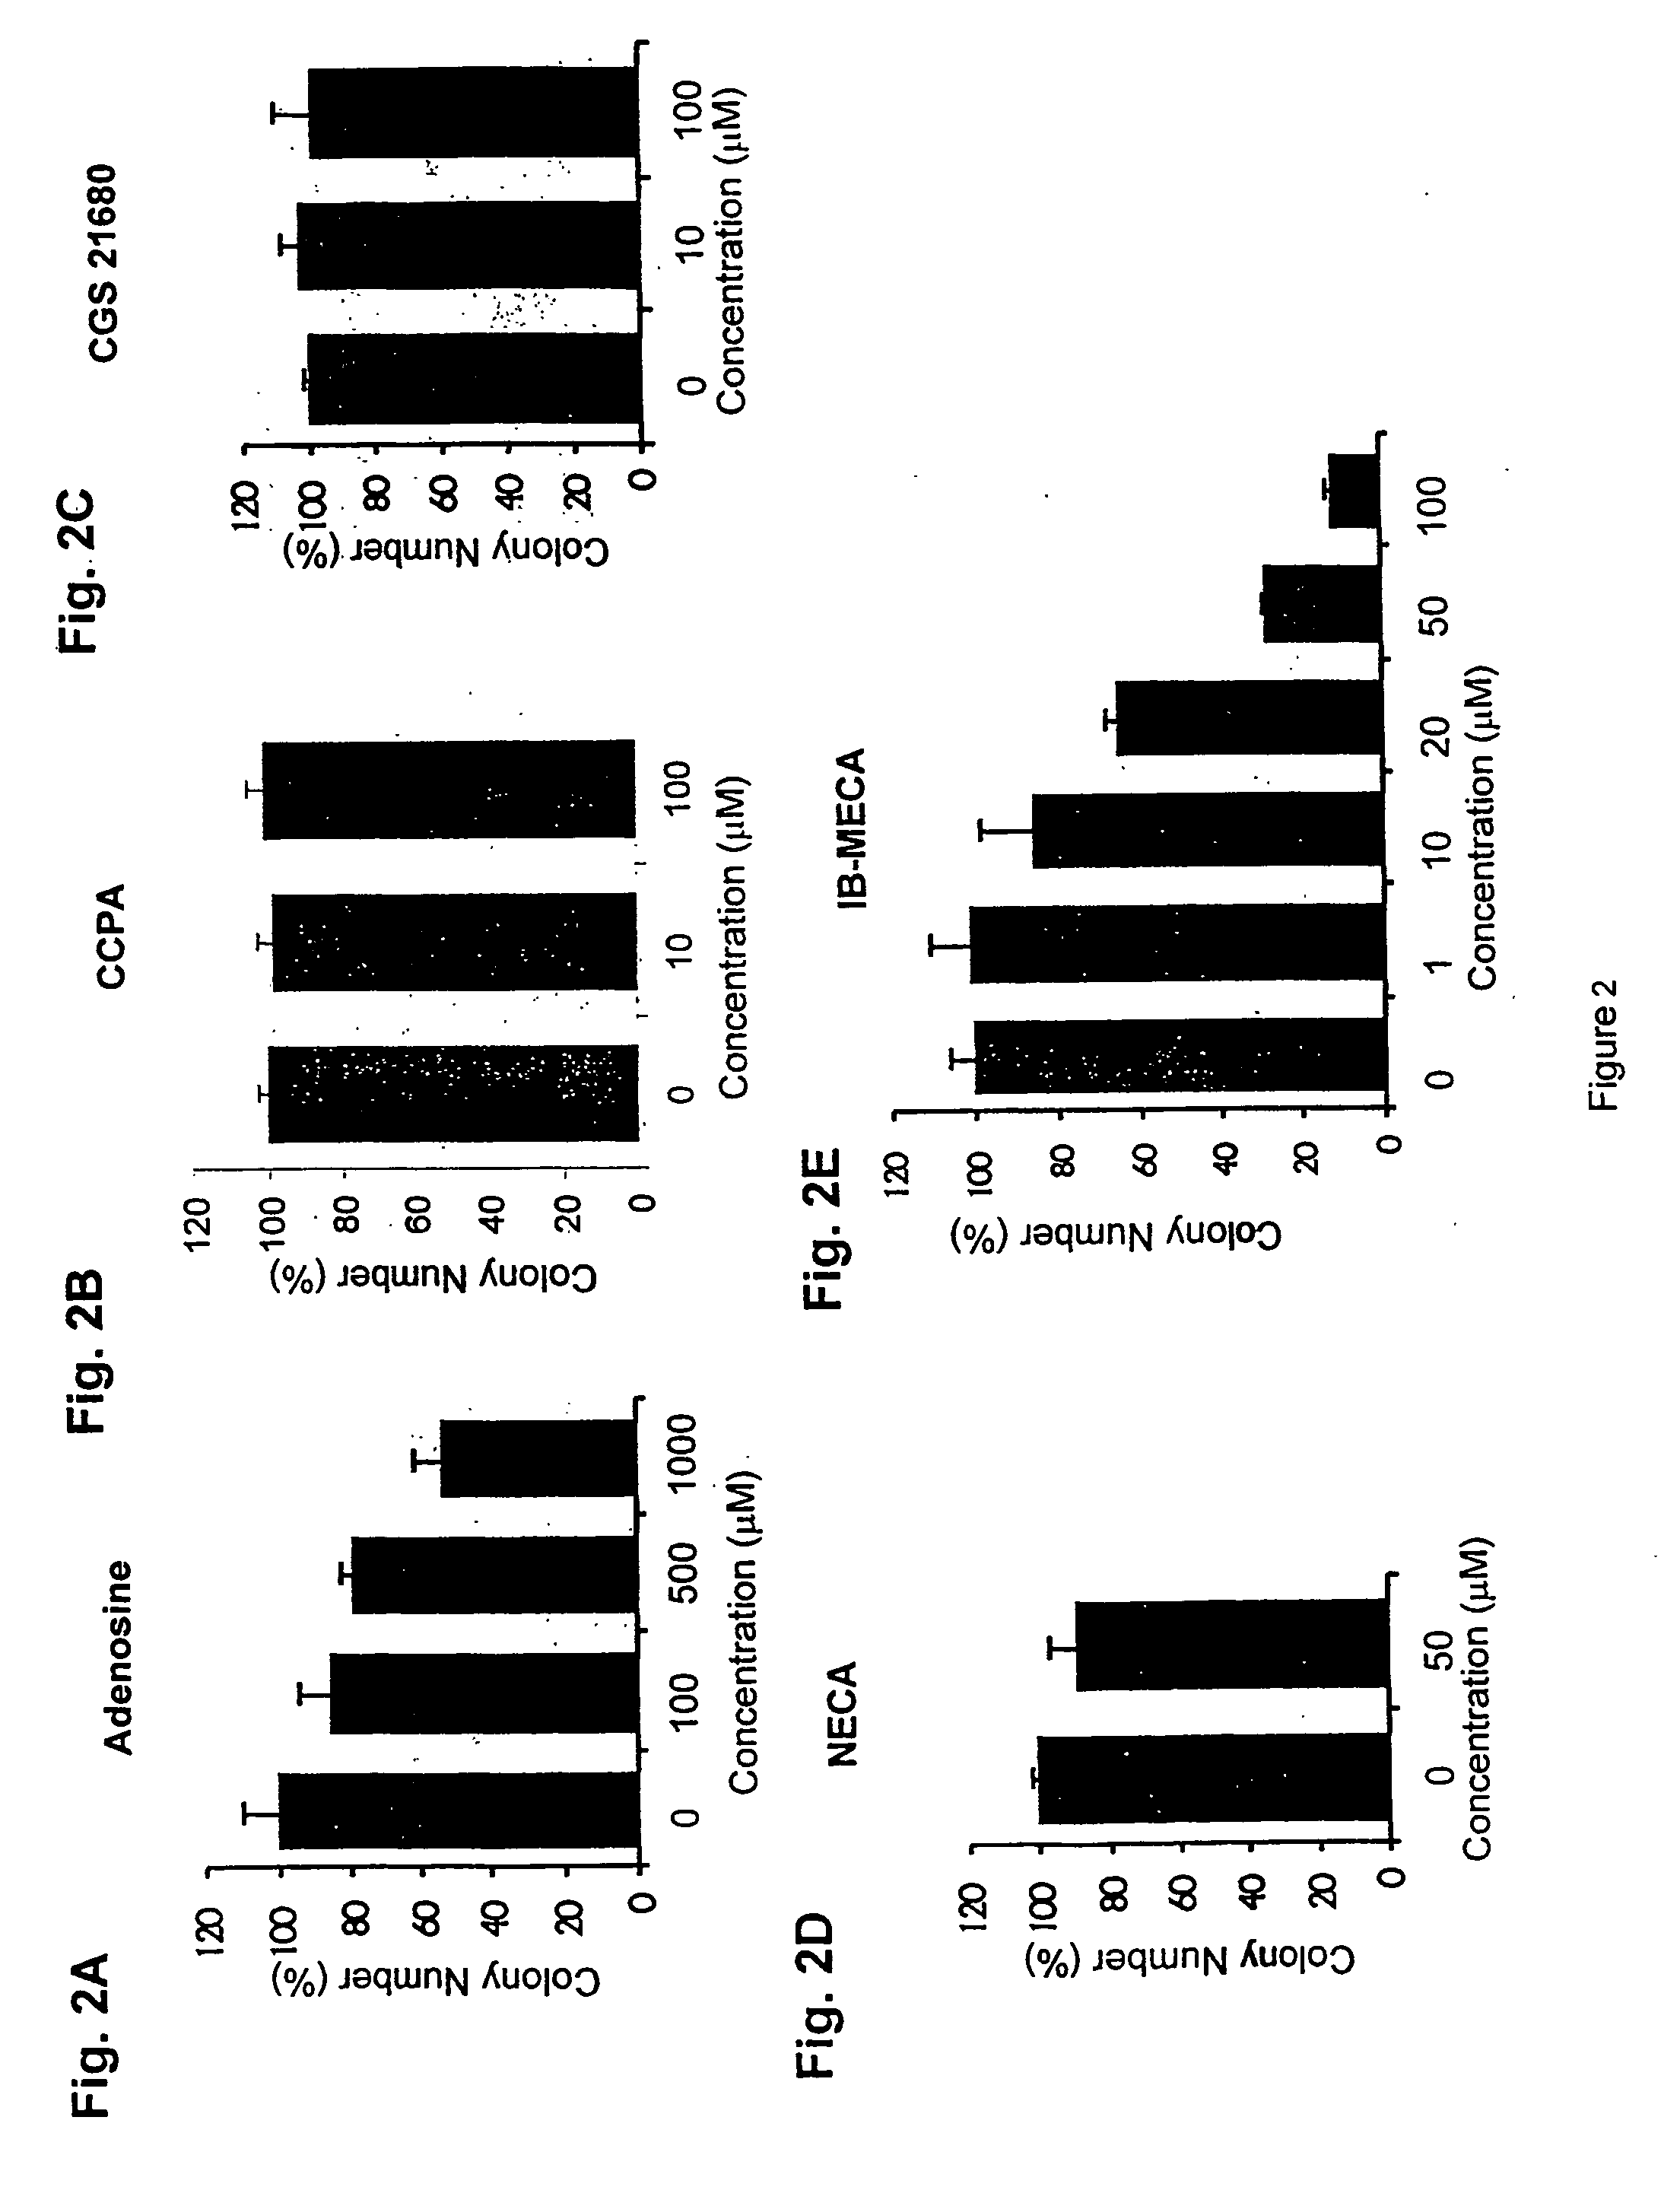 Method of treating cancer using adenosine and its analogs